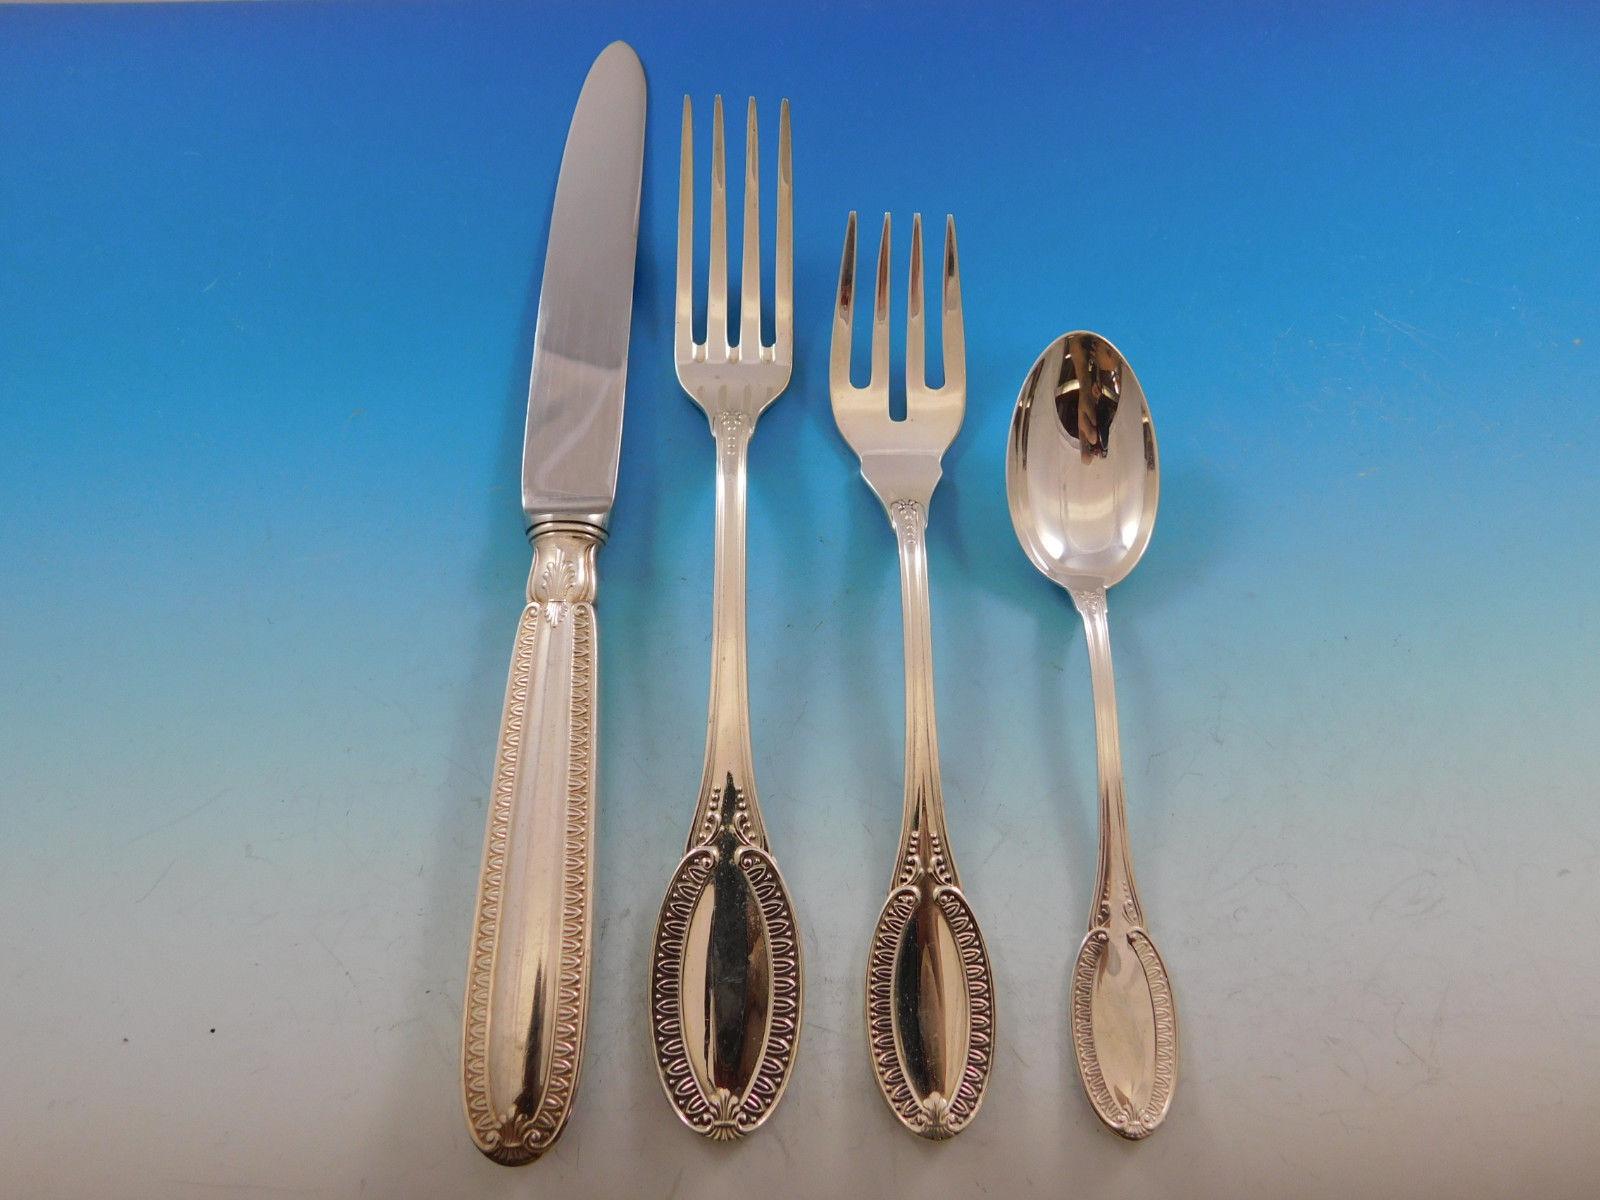 Large Continental size Impero by Wallace Italy sterling silver flatware set, 30 pieces. Great starter set! This set includes:

Six continental size knives, 9 3/4